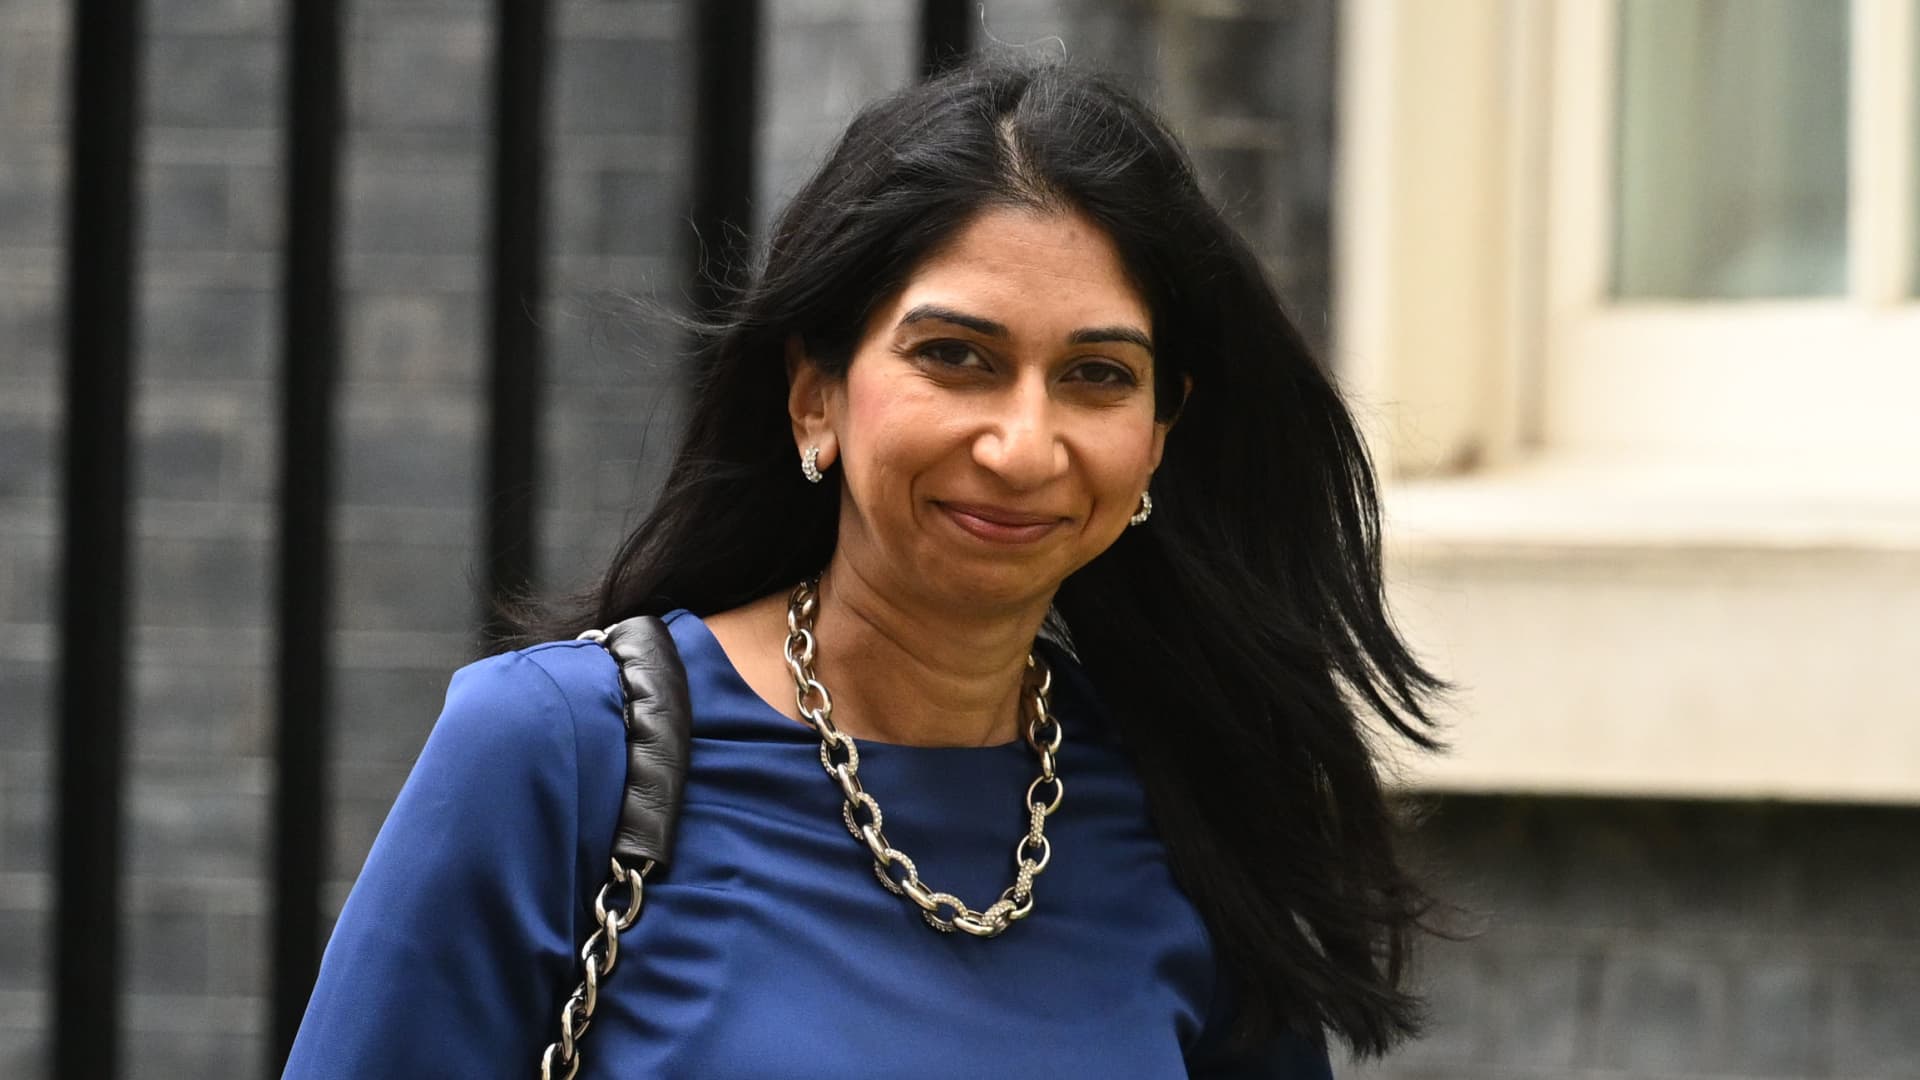 UK Interior Minister Suella Braverman fired after she accused London police of political bias 